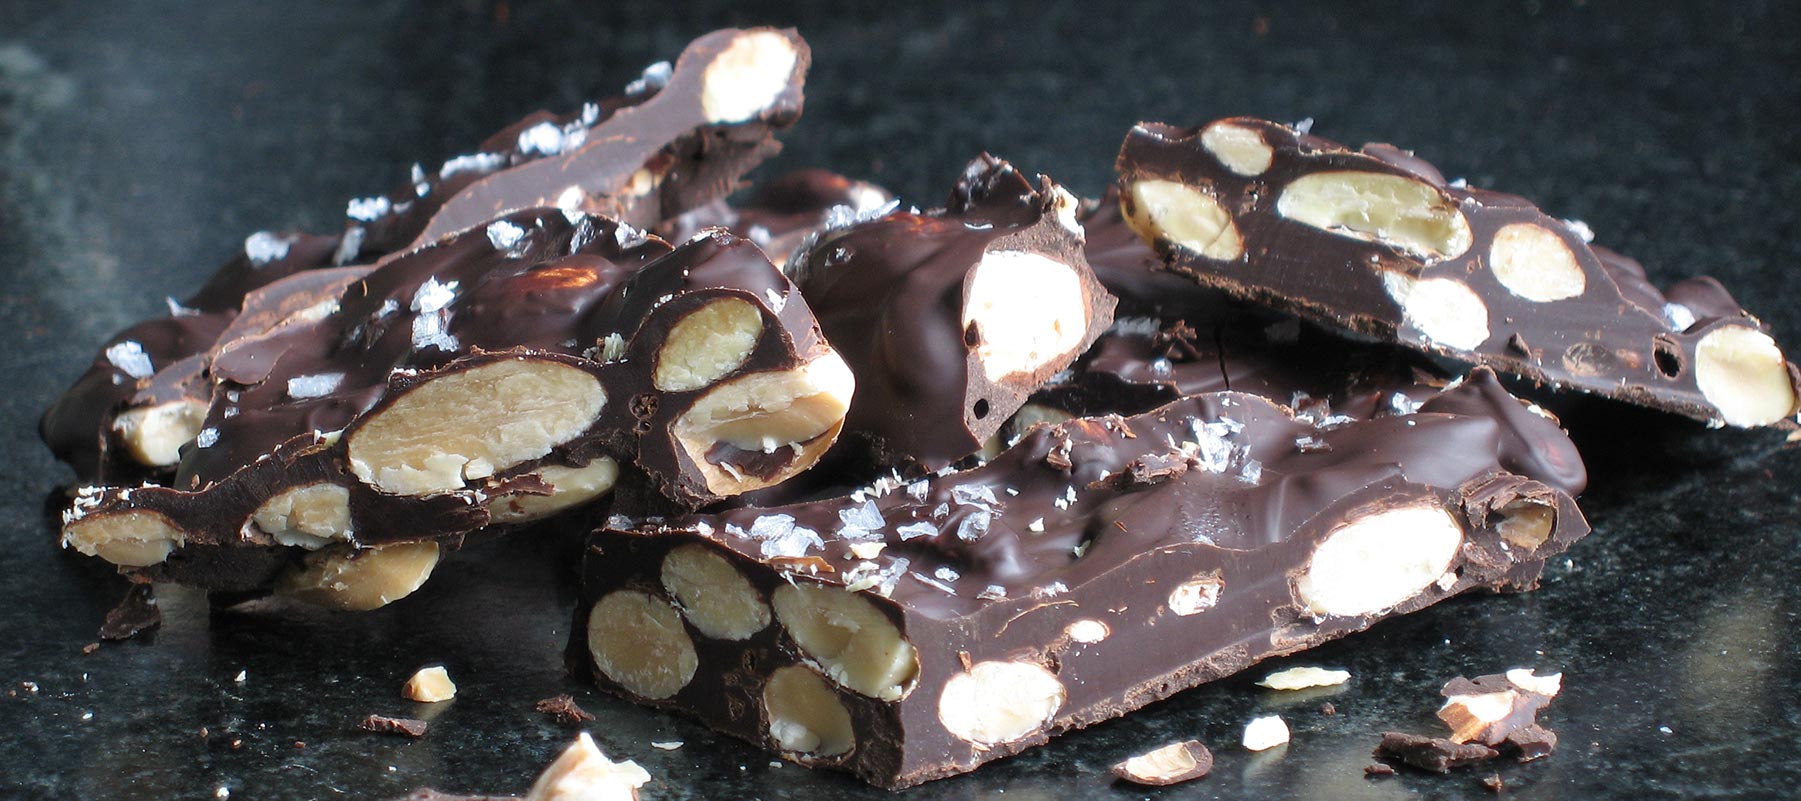 flavored chocolate bar with almonds